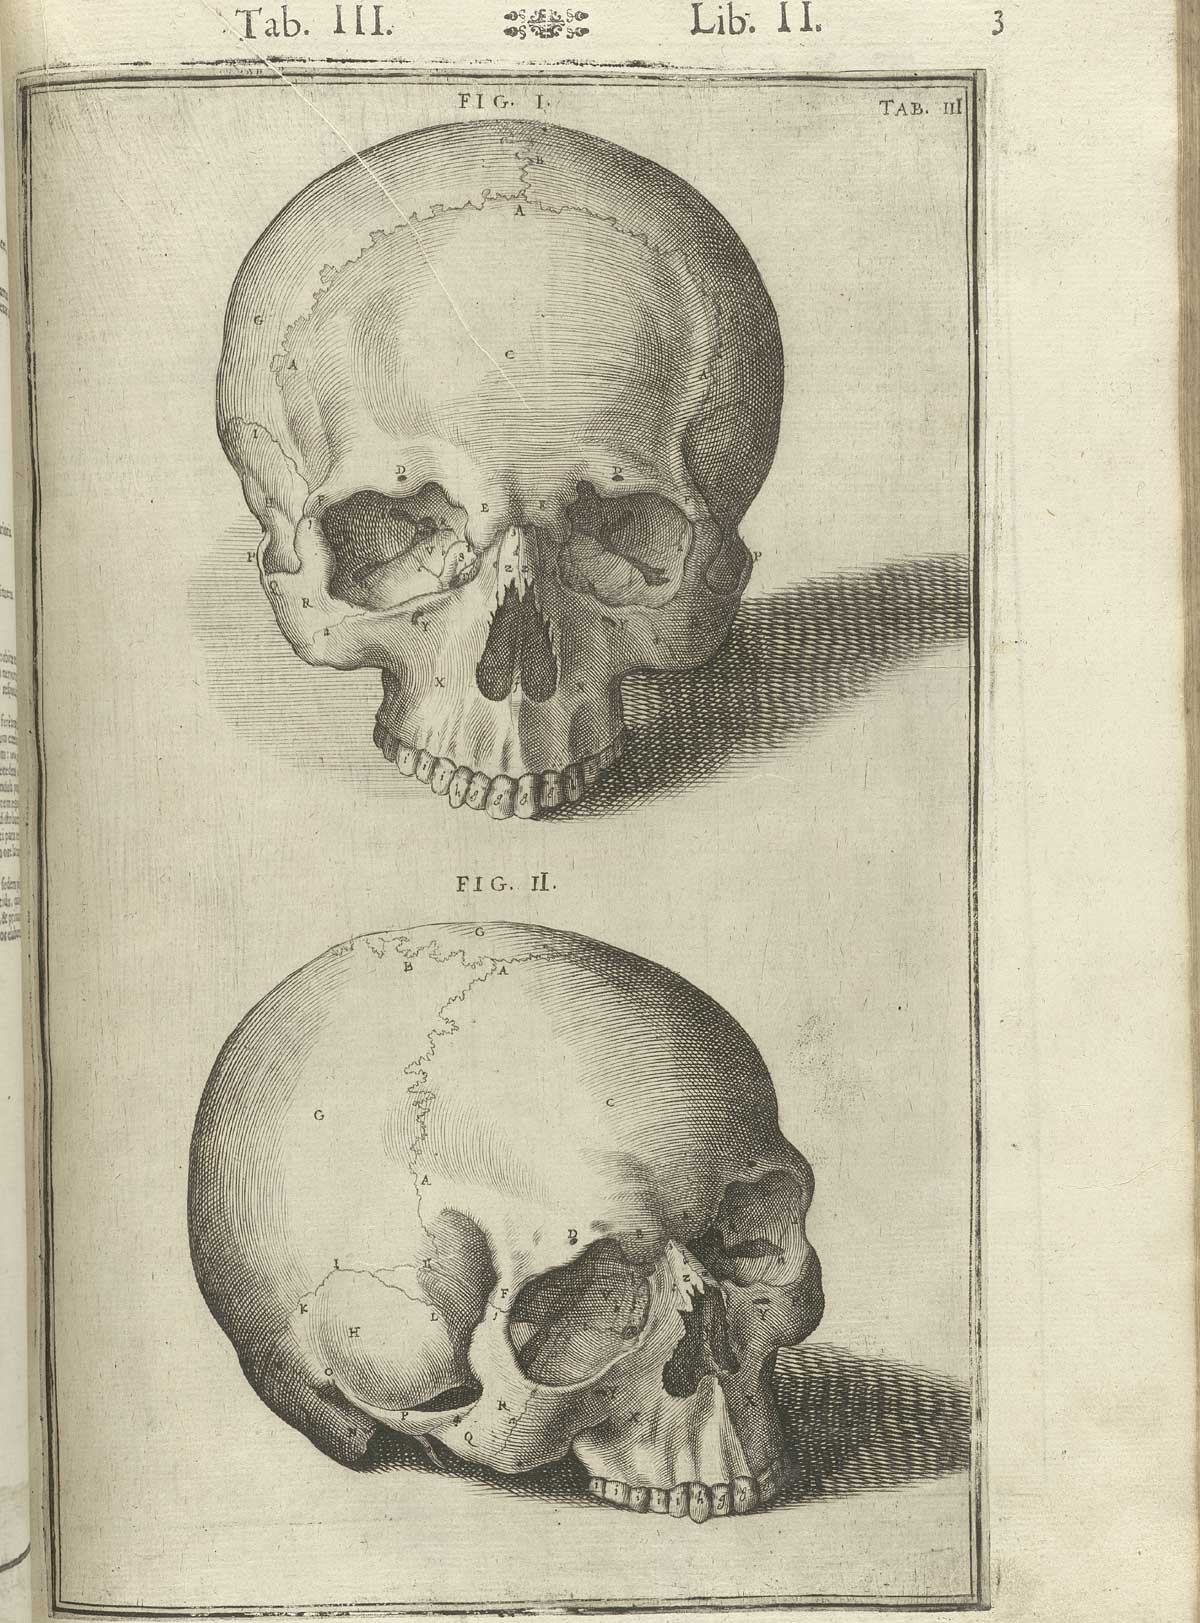 Engraving of two skulls lacking mandibles, the top facing directly at the viewer and the bottom one facing off to the right, from Adriaan van de Spiegel and Giulio Cassieri’s De humani corporis fabrica libri decem, Venice, 1627, NLM call no. WZ 250 S755dh 1627.